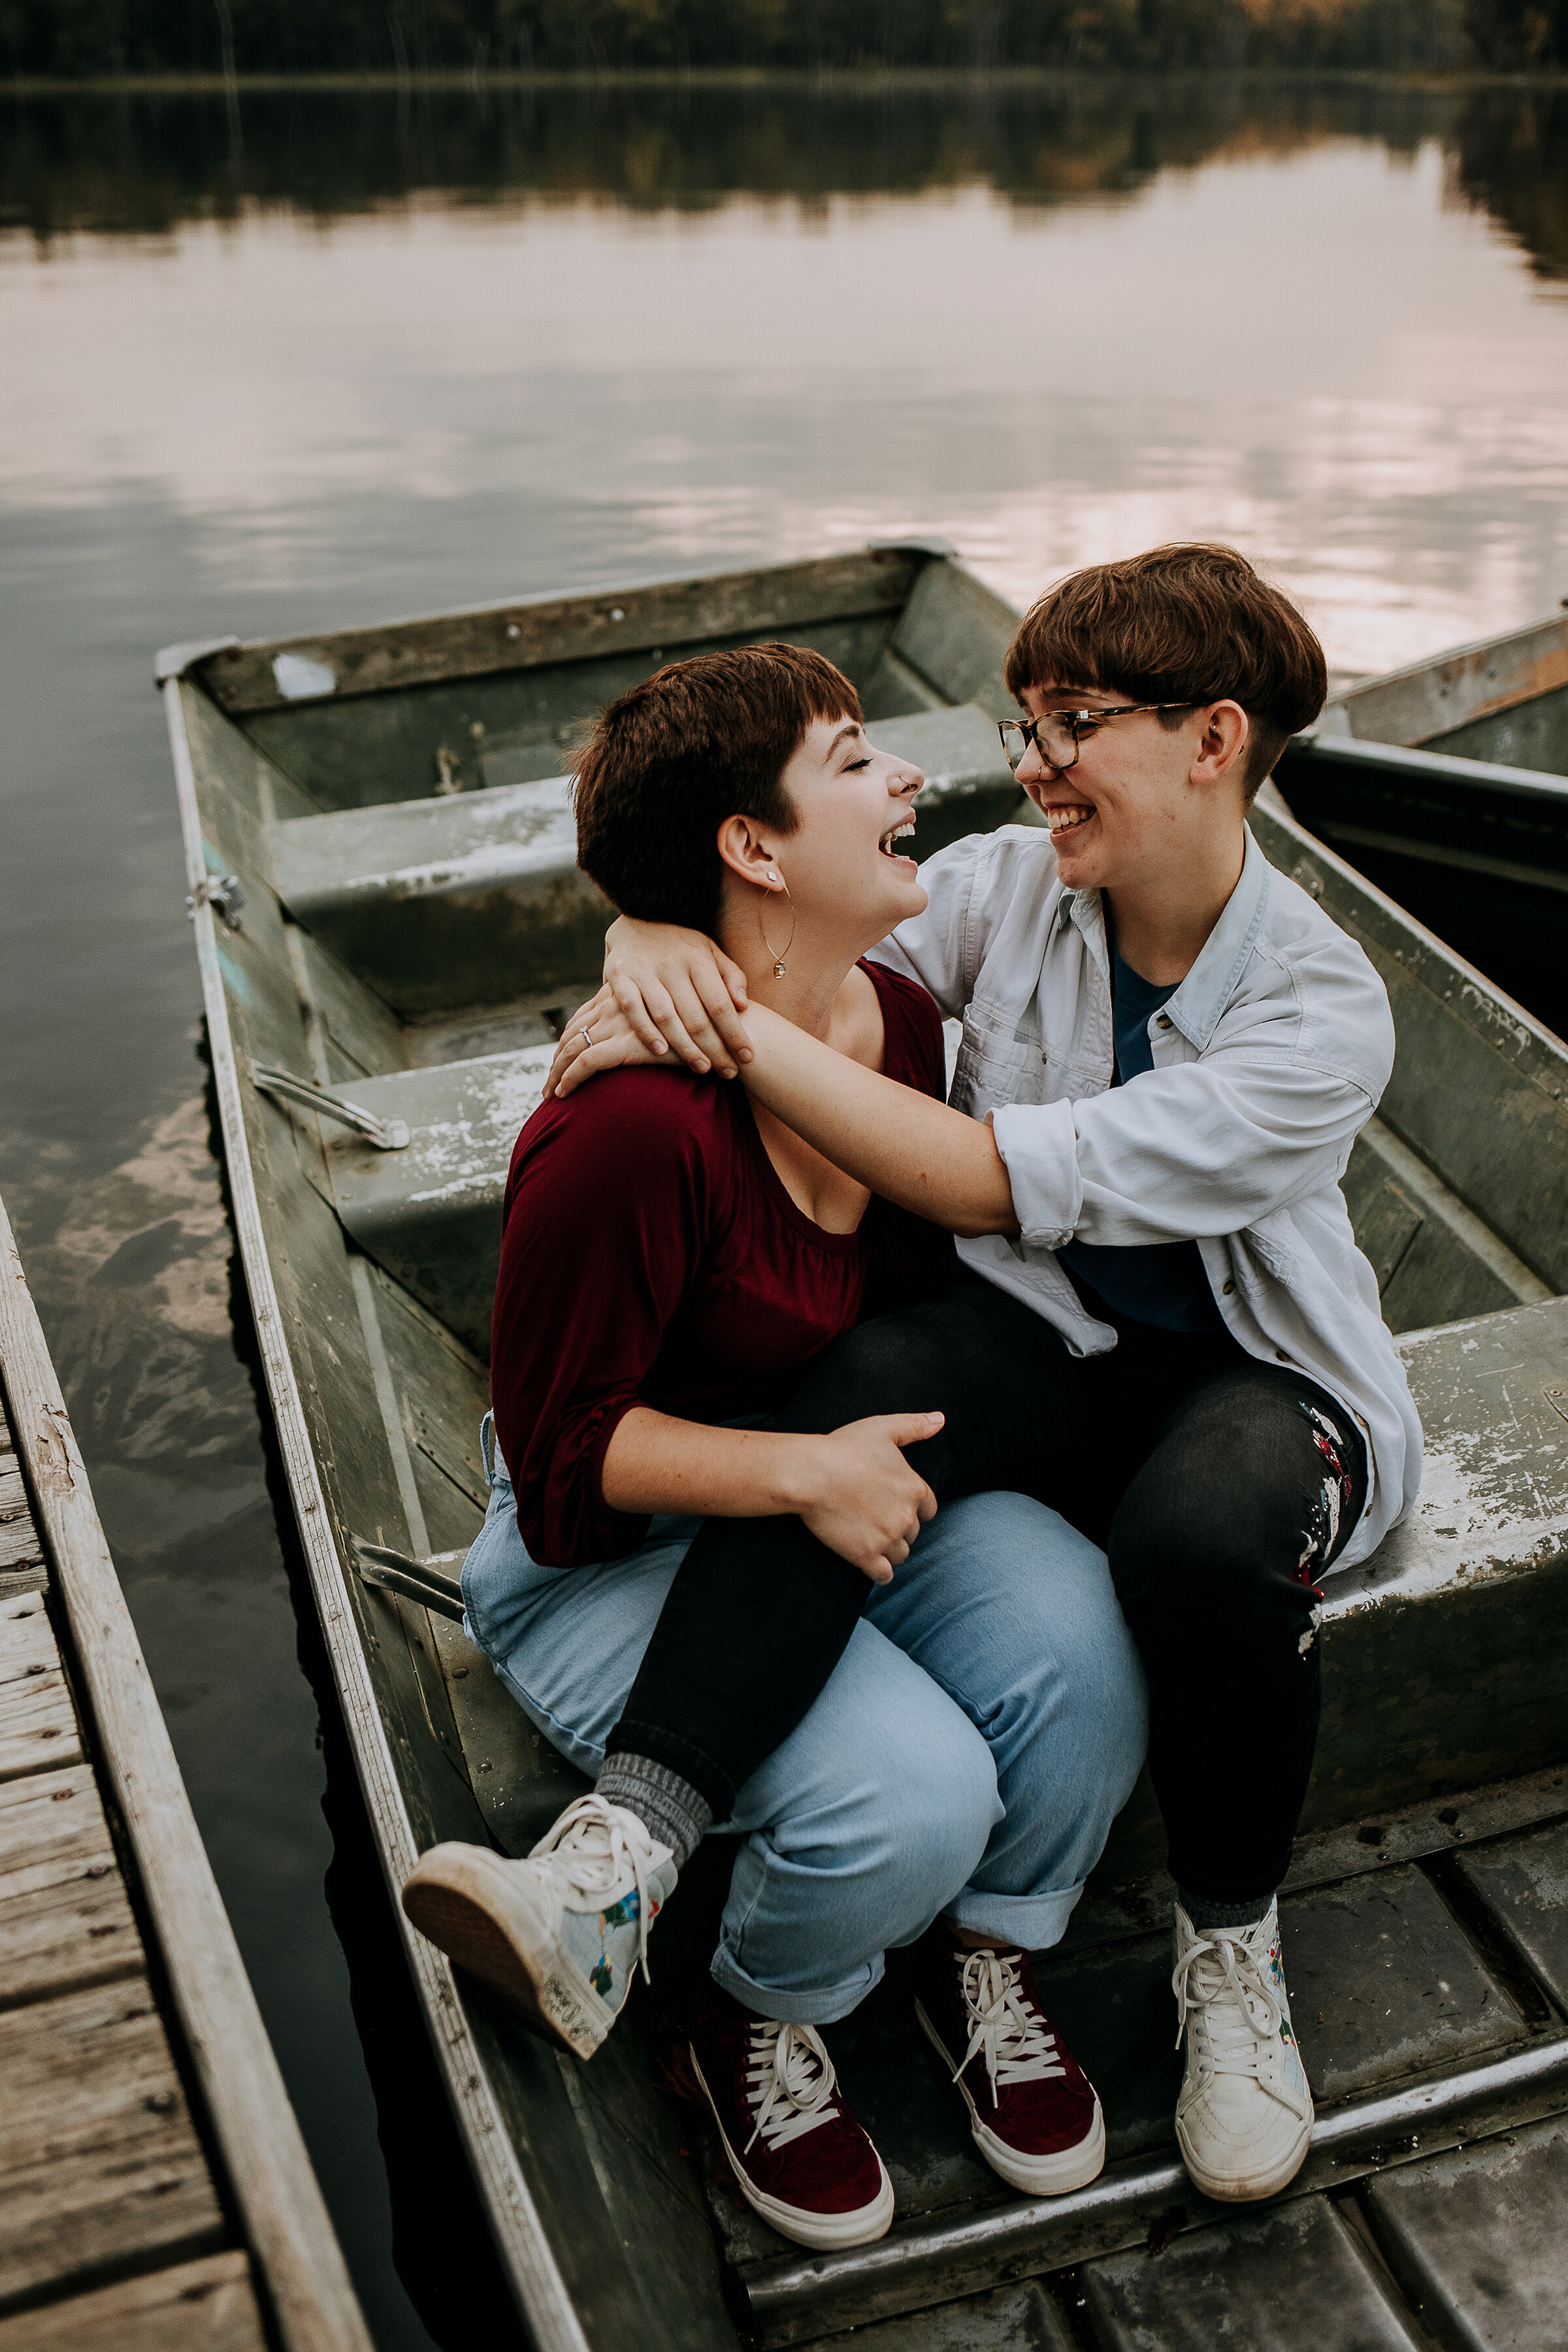  Cute candid shot of same-sex couple in a boat on a lake laughing wearing maroon and gray in Indiana by Kindred + Co. photoshoot with boat on a dock by a lake fort wayne indiana outdoor photoshoot locations by a lake fall photo outfit inspo with maro